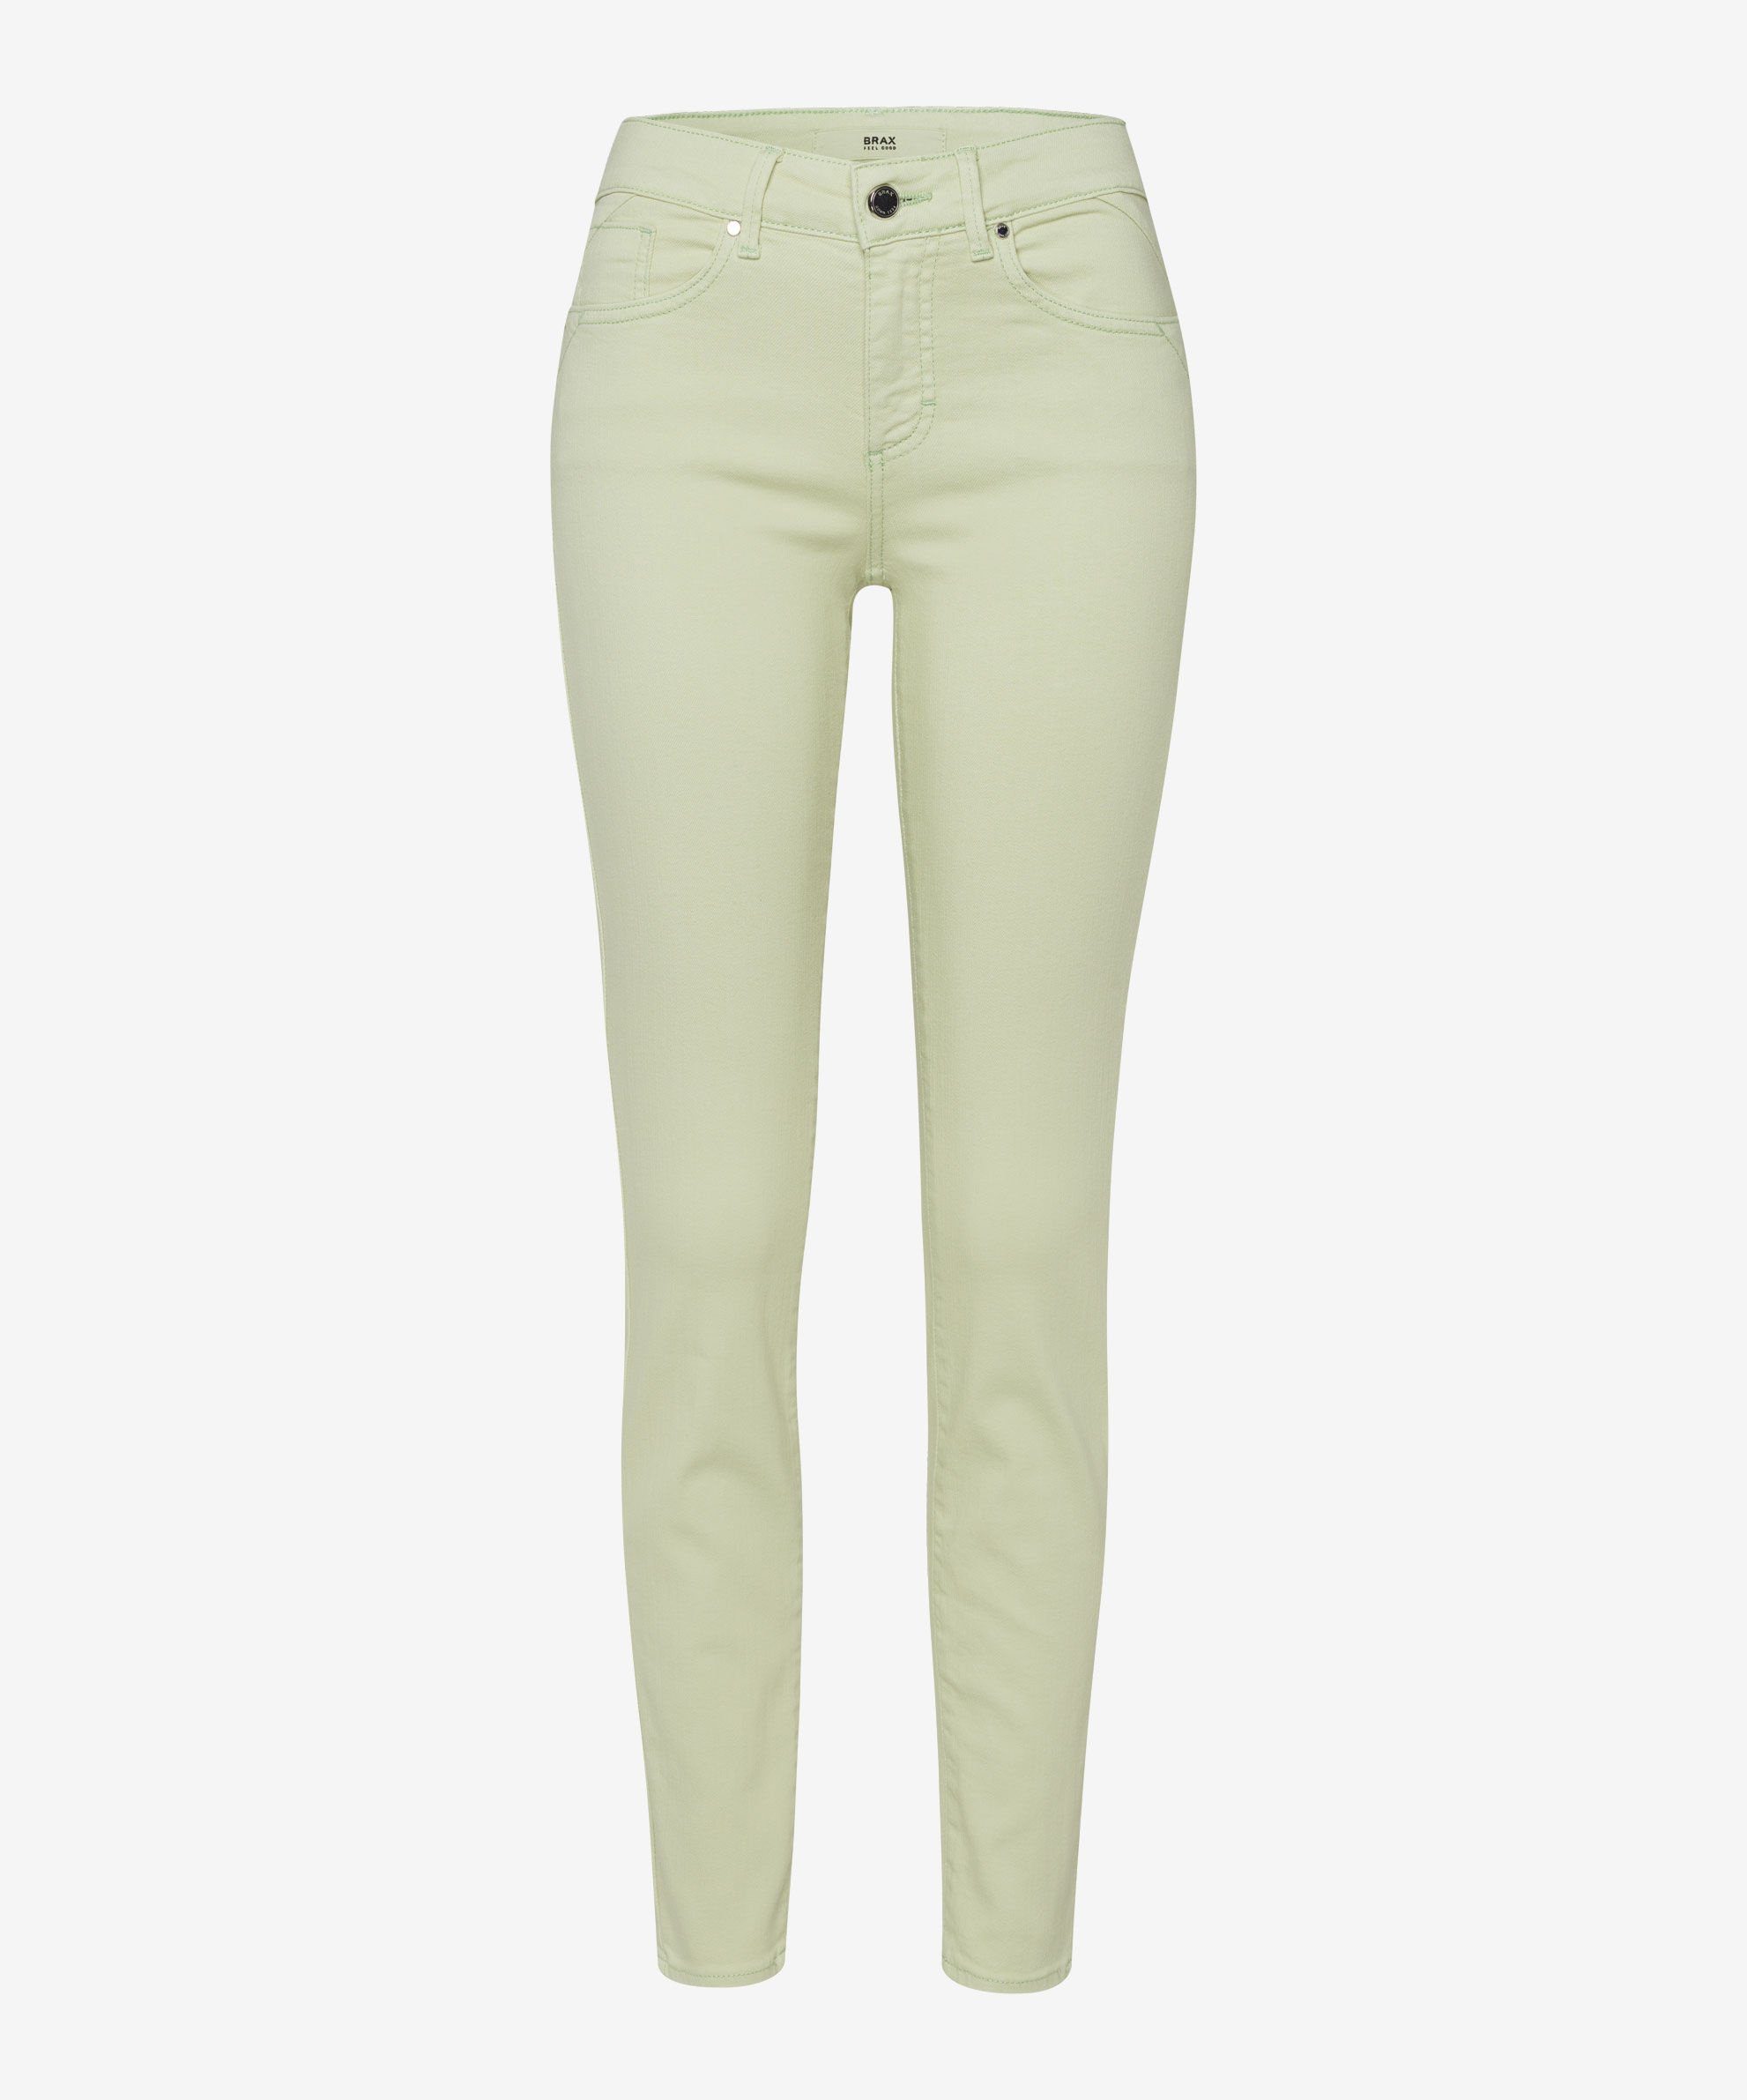 Brax Skinny-fit-Jeans Röhrenjeans in Thermo-Qualität iced mint